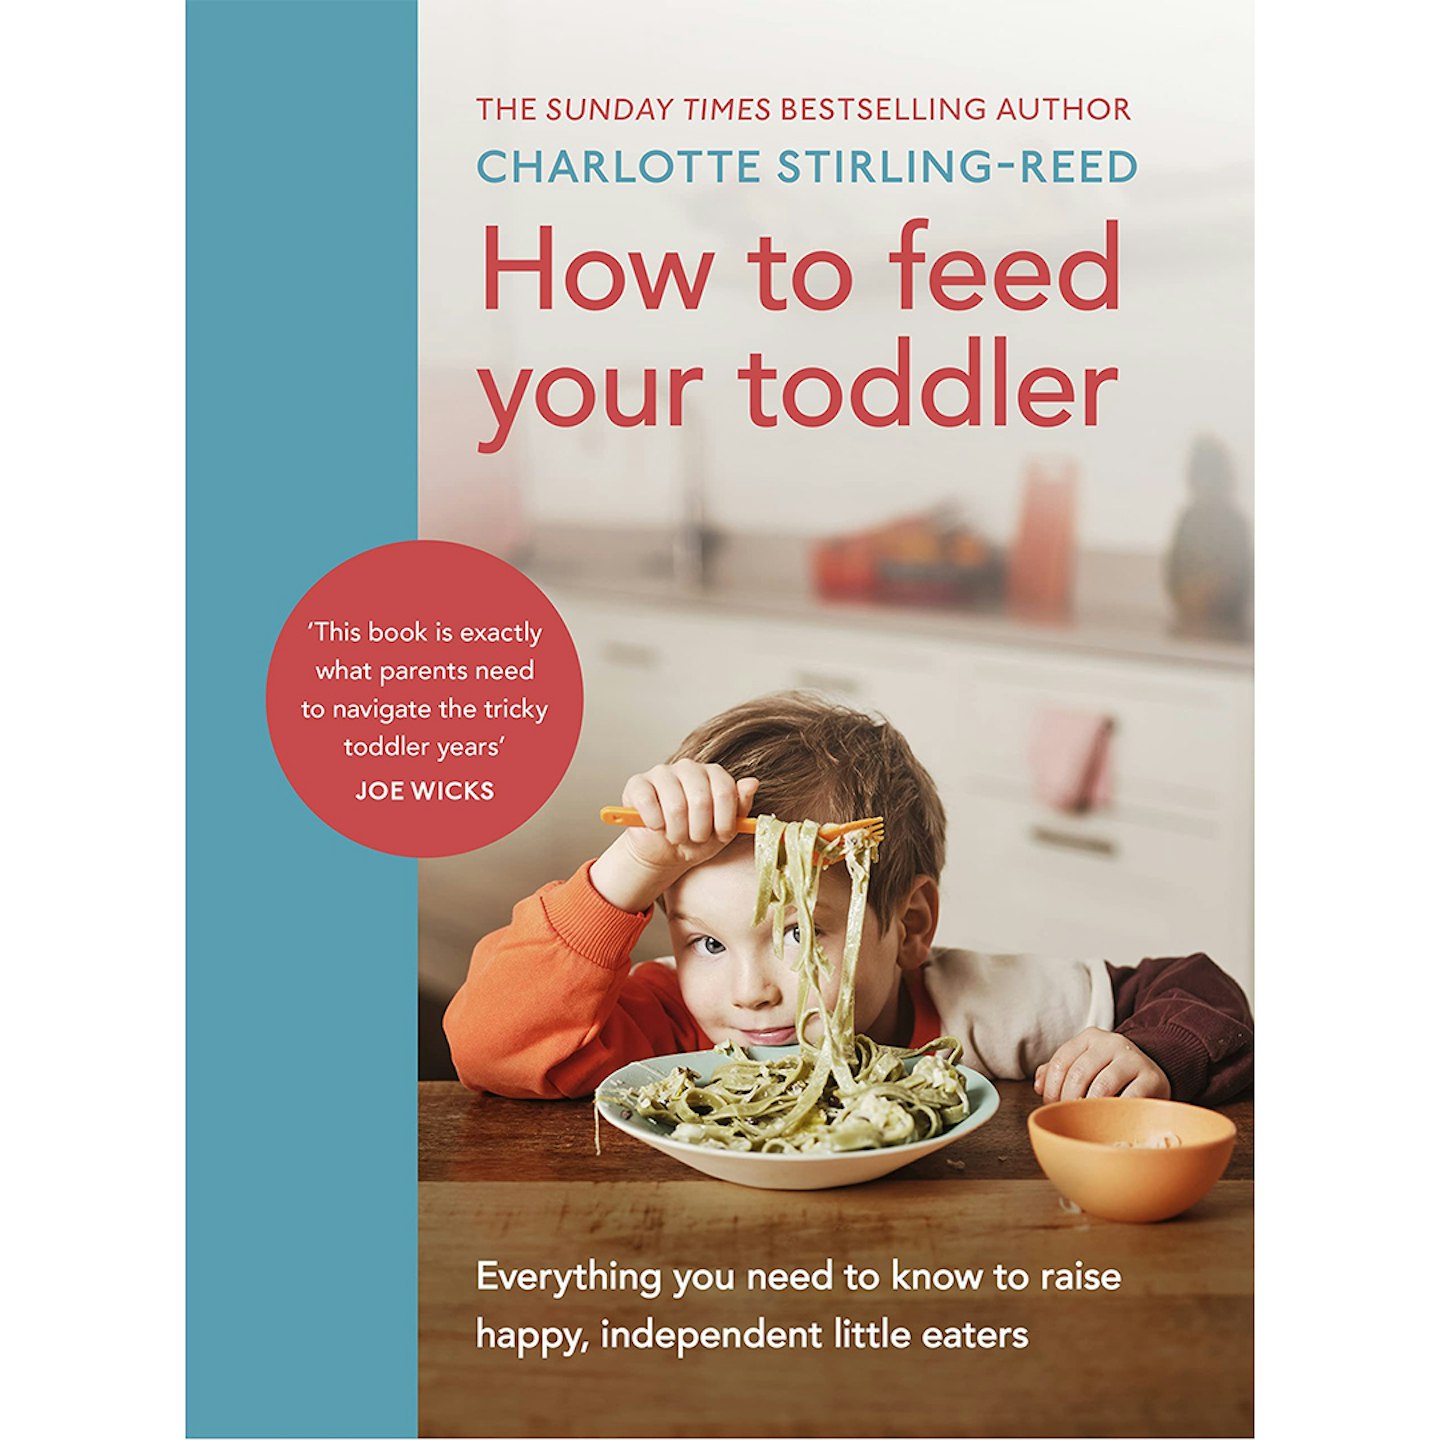 How to feed toddler